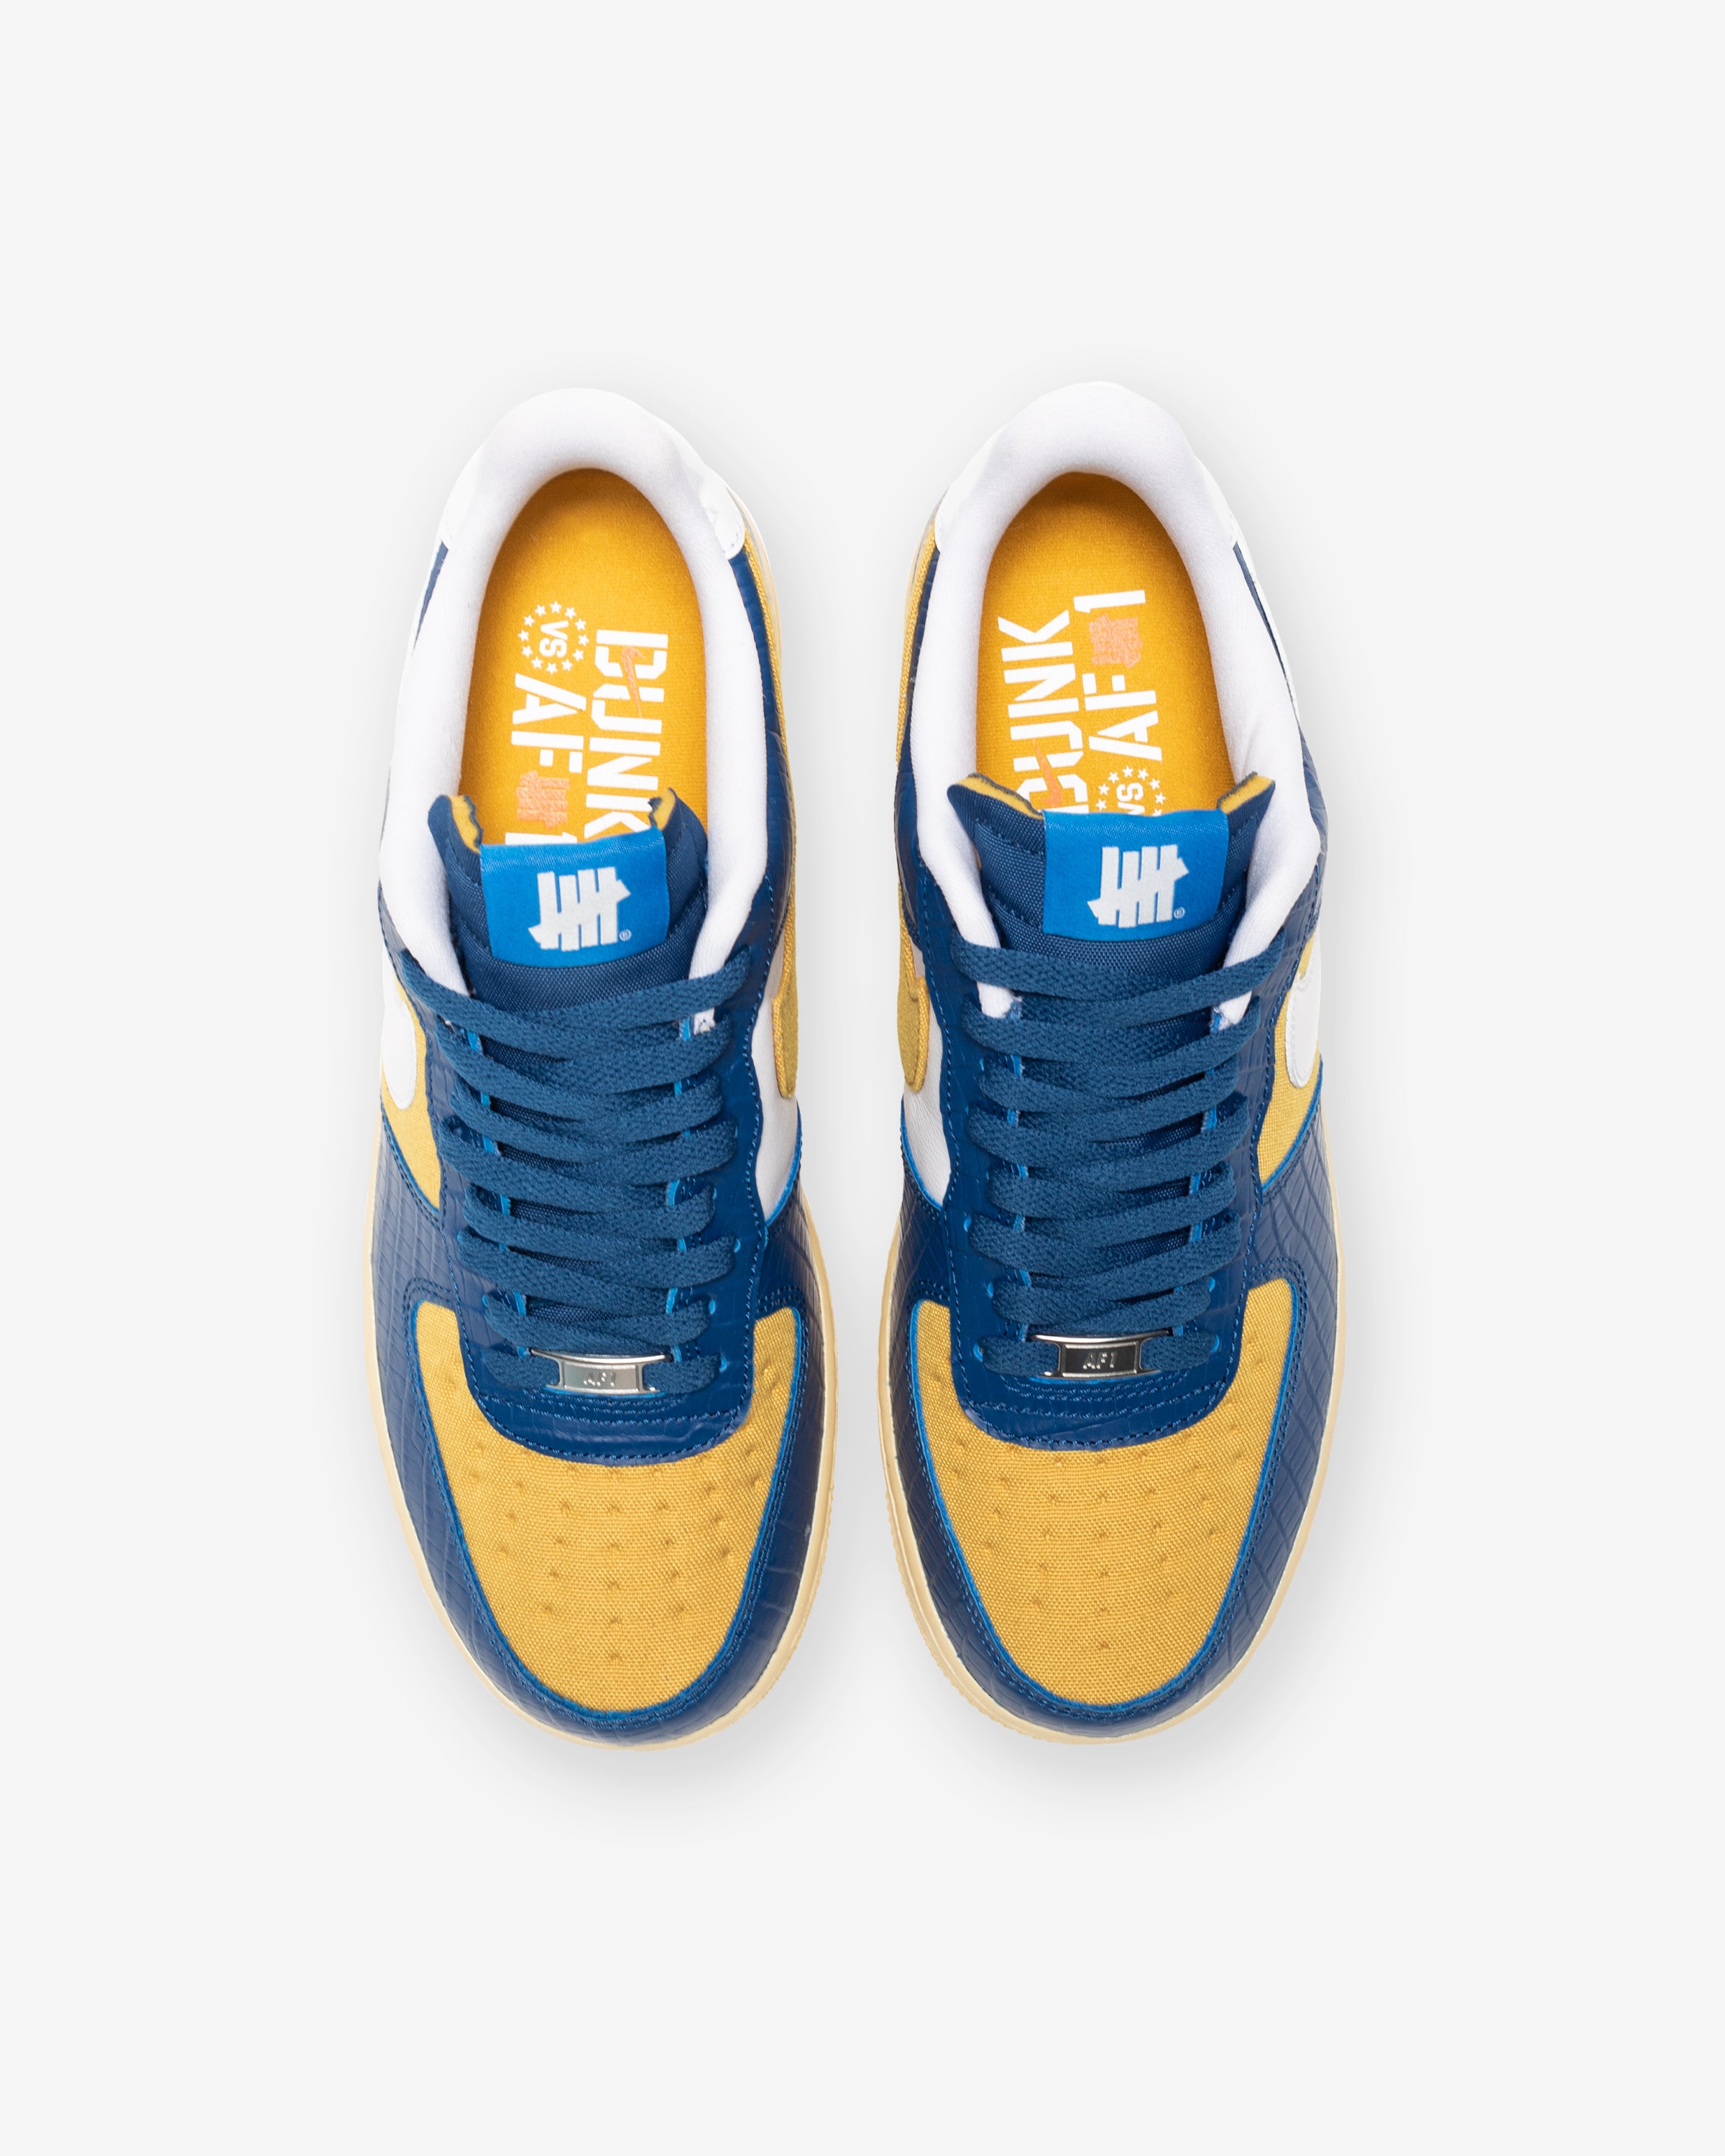 NIKE X UNDEFEATED AIR FORCE 1 LOW SP - COURTBLUE/ WHITE/ GOLD